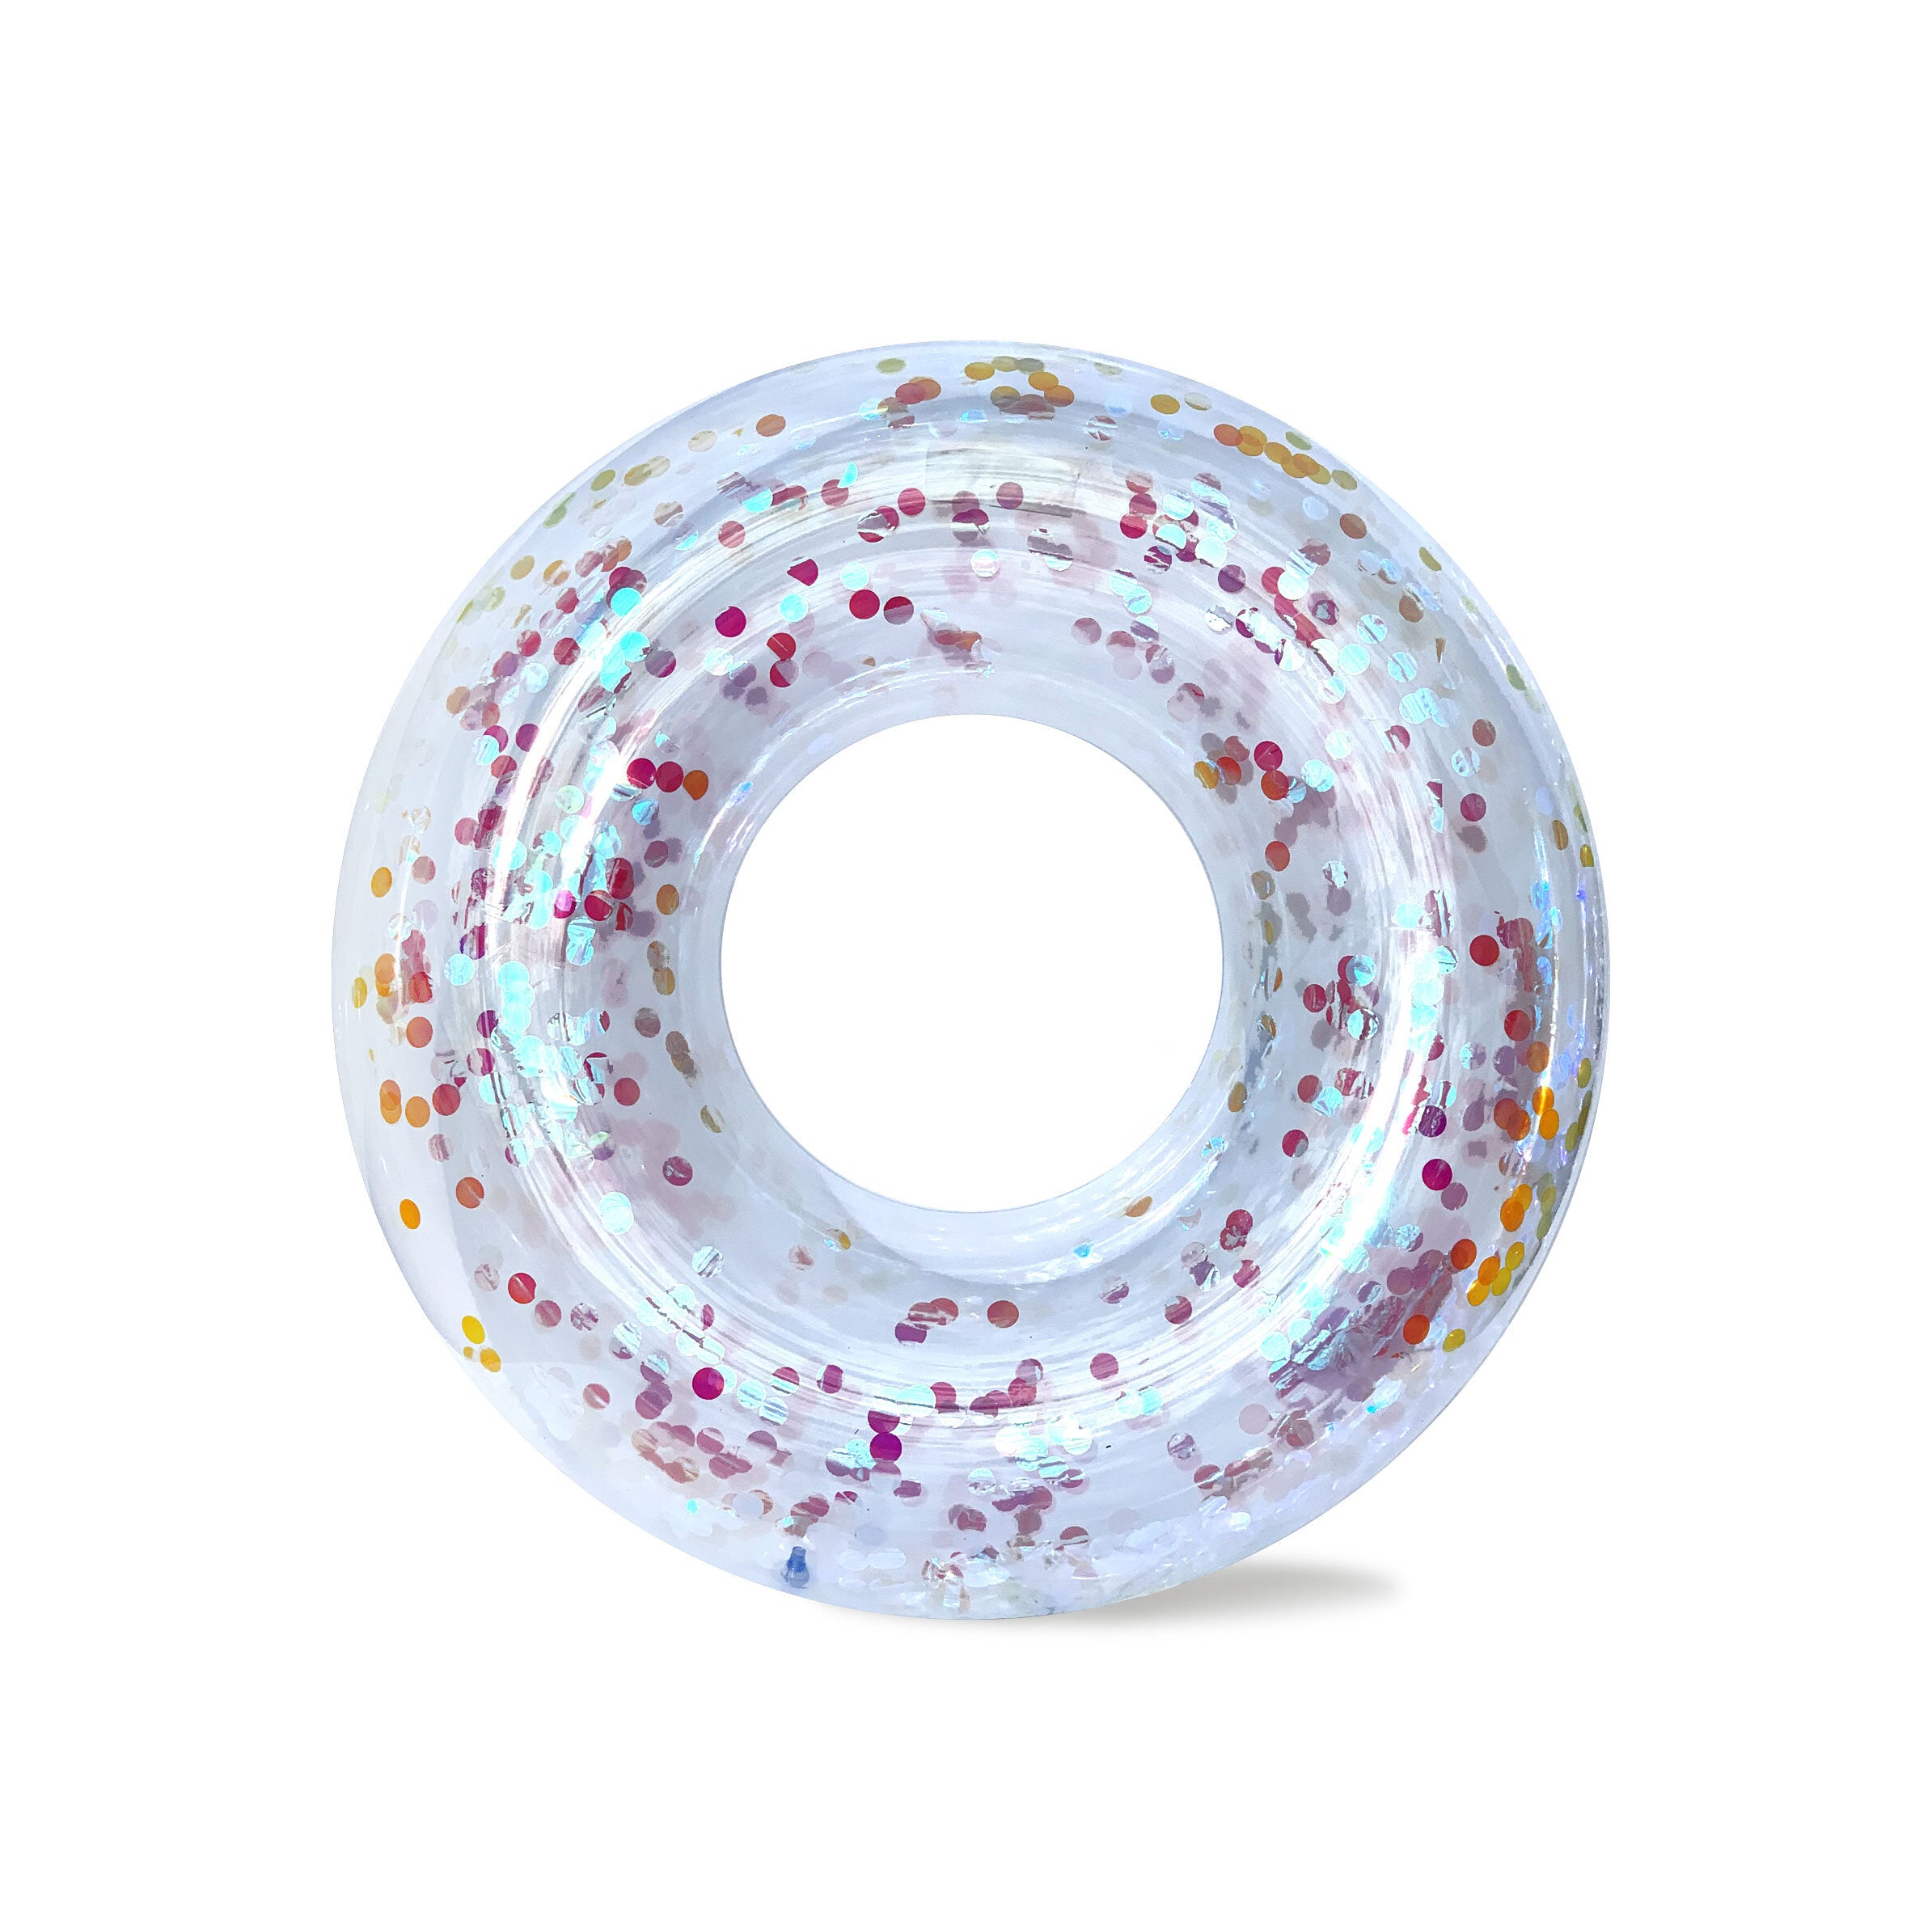 the CUE THE CONFETTI! RING FLOAT in Iridescent